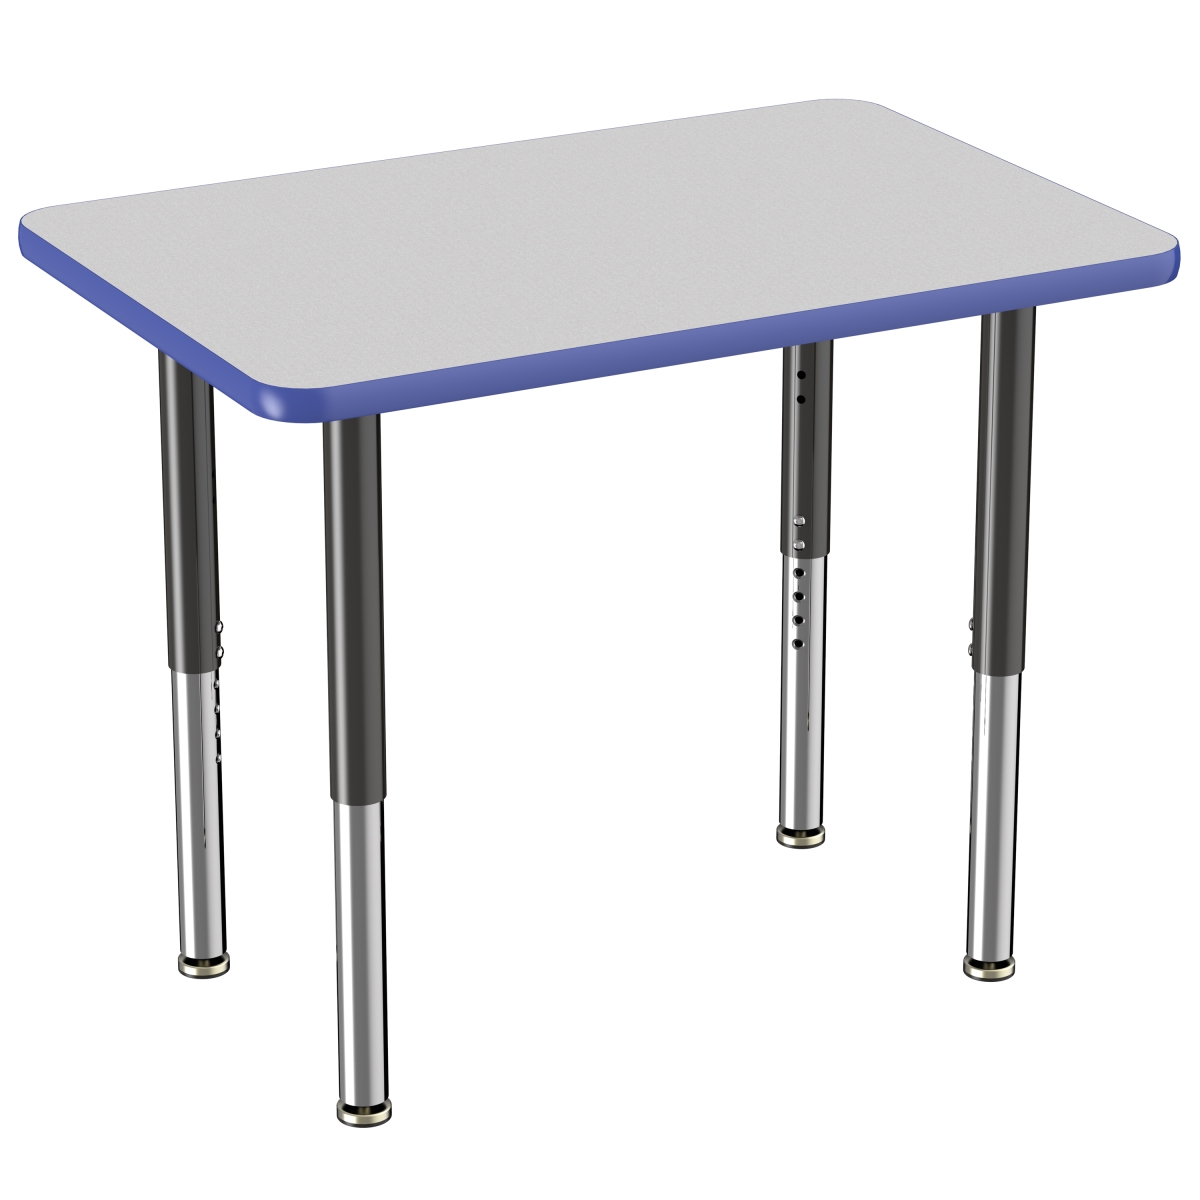 10006-gybl 24 X 36 In. Rectangle T-mold Adjustable Activity Table With Super Leg - Grey & Blue